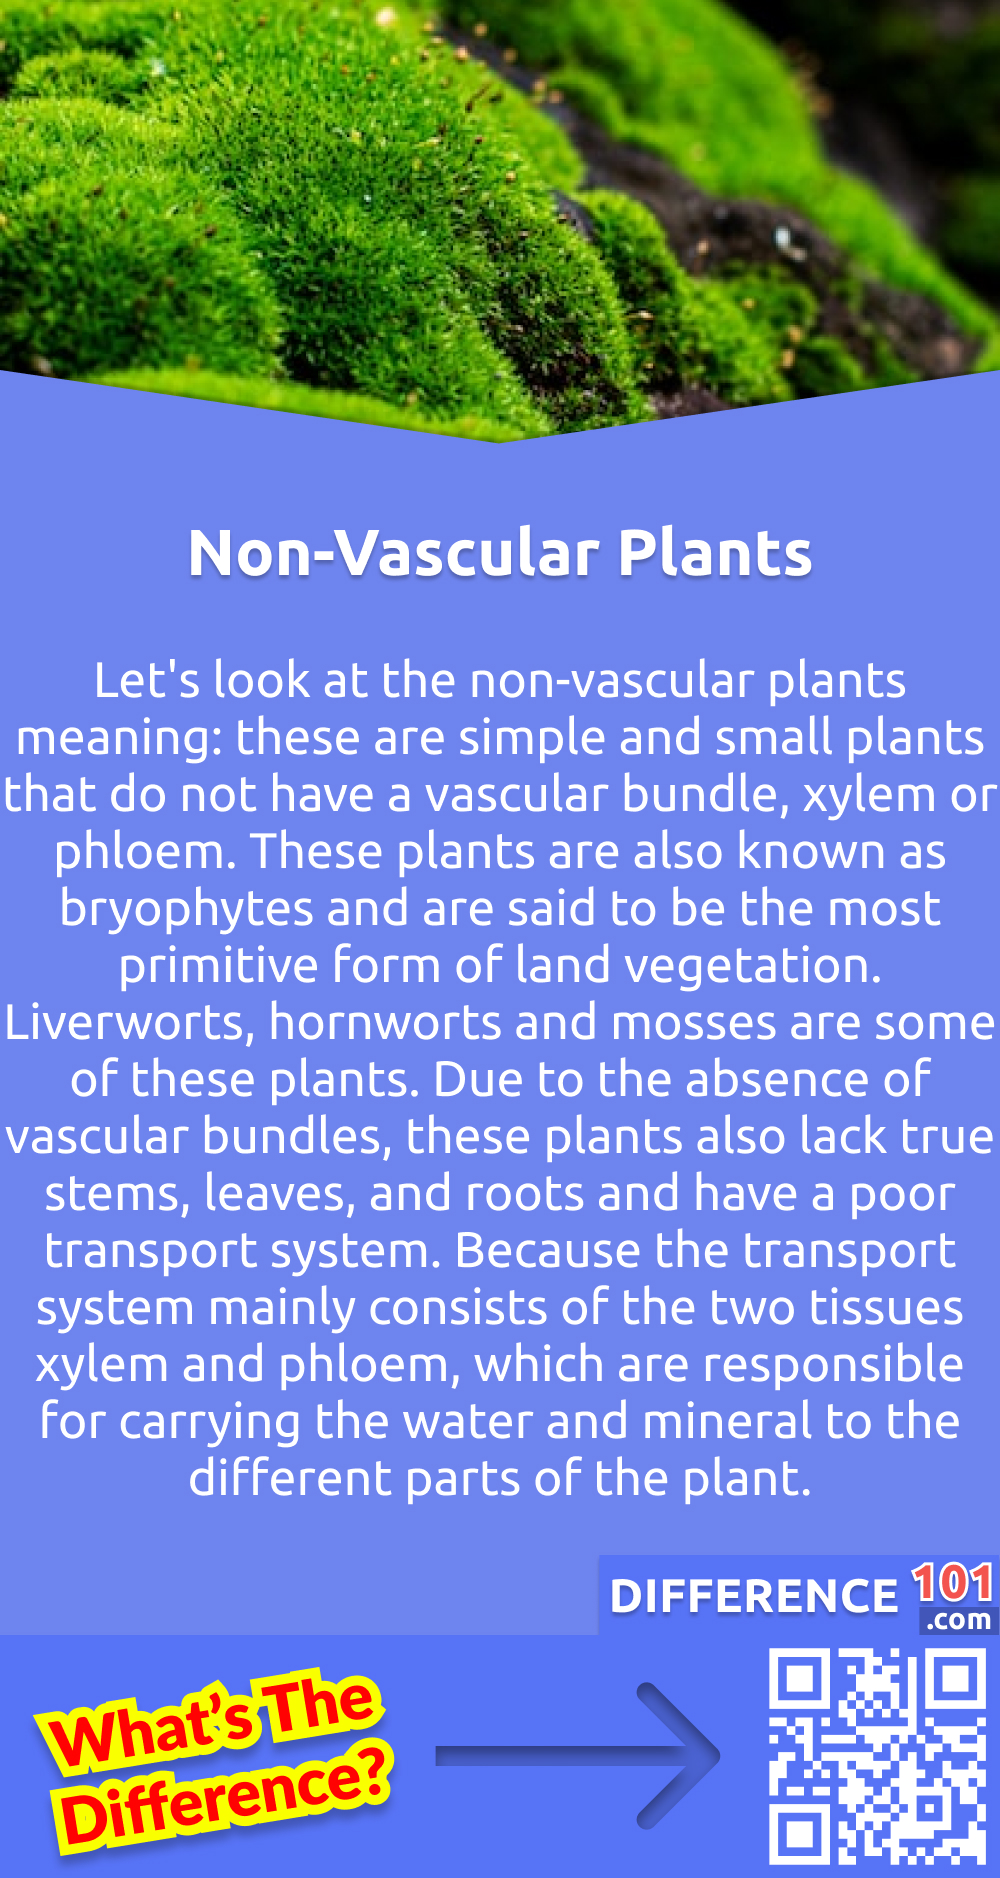 What Are Non-vascular Plants? Let's look at the non-vascular plants meaning: these are simple and small plants that do not have a vascular bundle, xylem or phloem. These plants are also known as bryophytes and are said to be the most primitive form of land vegetation. Liverworts, hornworts and mosses are some of these plants. Due to the absence of vascular bundles, these plants also lack true stems, leaves, and roots and have a poor transport system. Because the transport system mainly consists of the two tissues xylem and phloem, which are responsible for carrying the water and mineral to the different parts of the plant. But in contrast to the vascular bundles, these plants have certain other specialized tissues which help them in the transportation of water and minerals. But these specialized tissues do not contain lignin; that's why these cannot be said to be vascular tissues. Due to the absence of vascular bundles, these plants cannot grow at large heights and the absence of wood, fruits and flowers. These plants are mostly found in shady and moist areas. The green parts of these plants, known as the thallus and rhizoids, have thin filaments, which help in anchoring the plant to the ground.